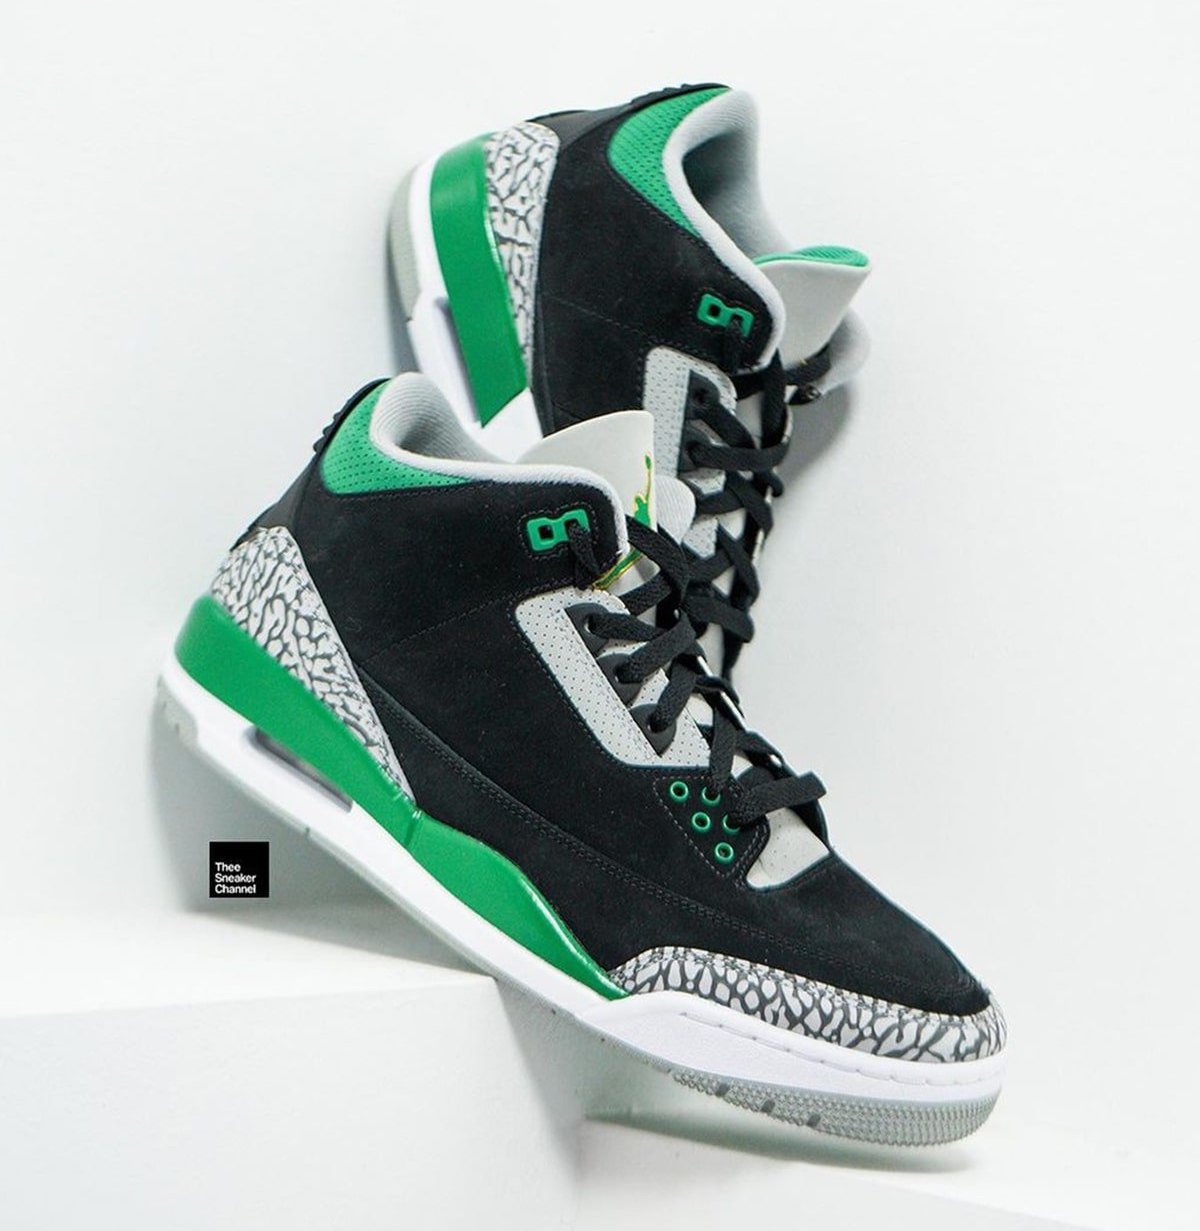 green and black jordans that just came out